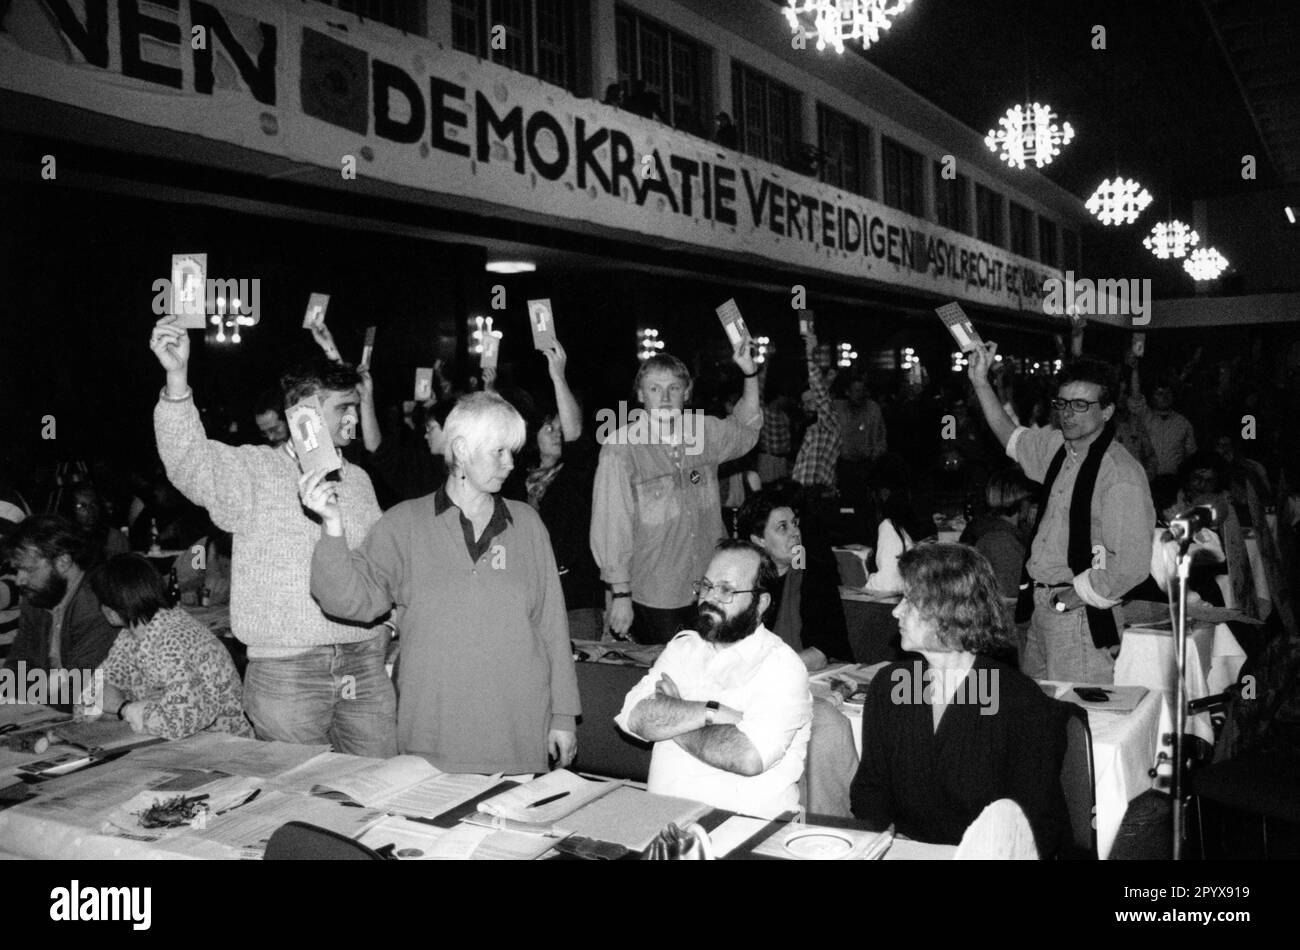 Alliance '90/The Greens, 23.11.1992 - association treaty and unification party conference 16.01.1993-17.01.1993, politics, parties, Germany since 1990 FRG Stock Photo